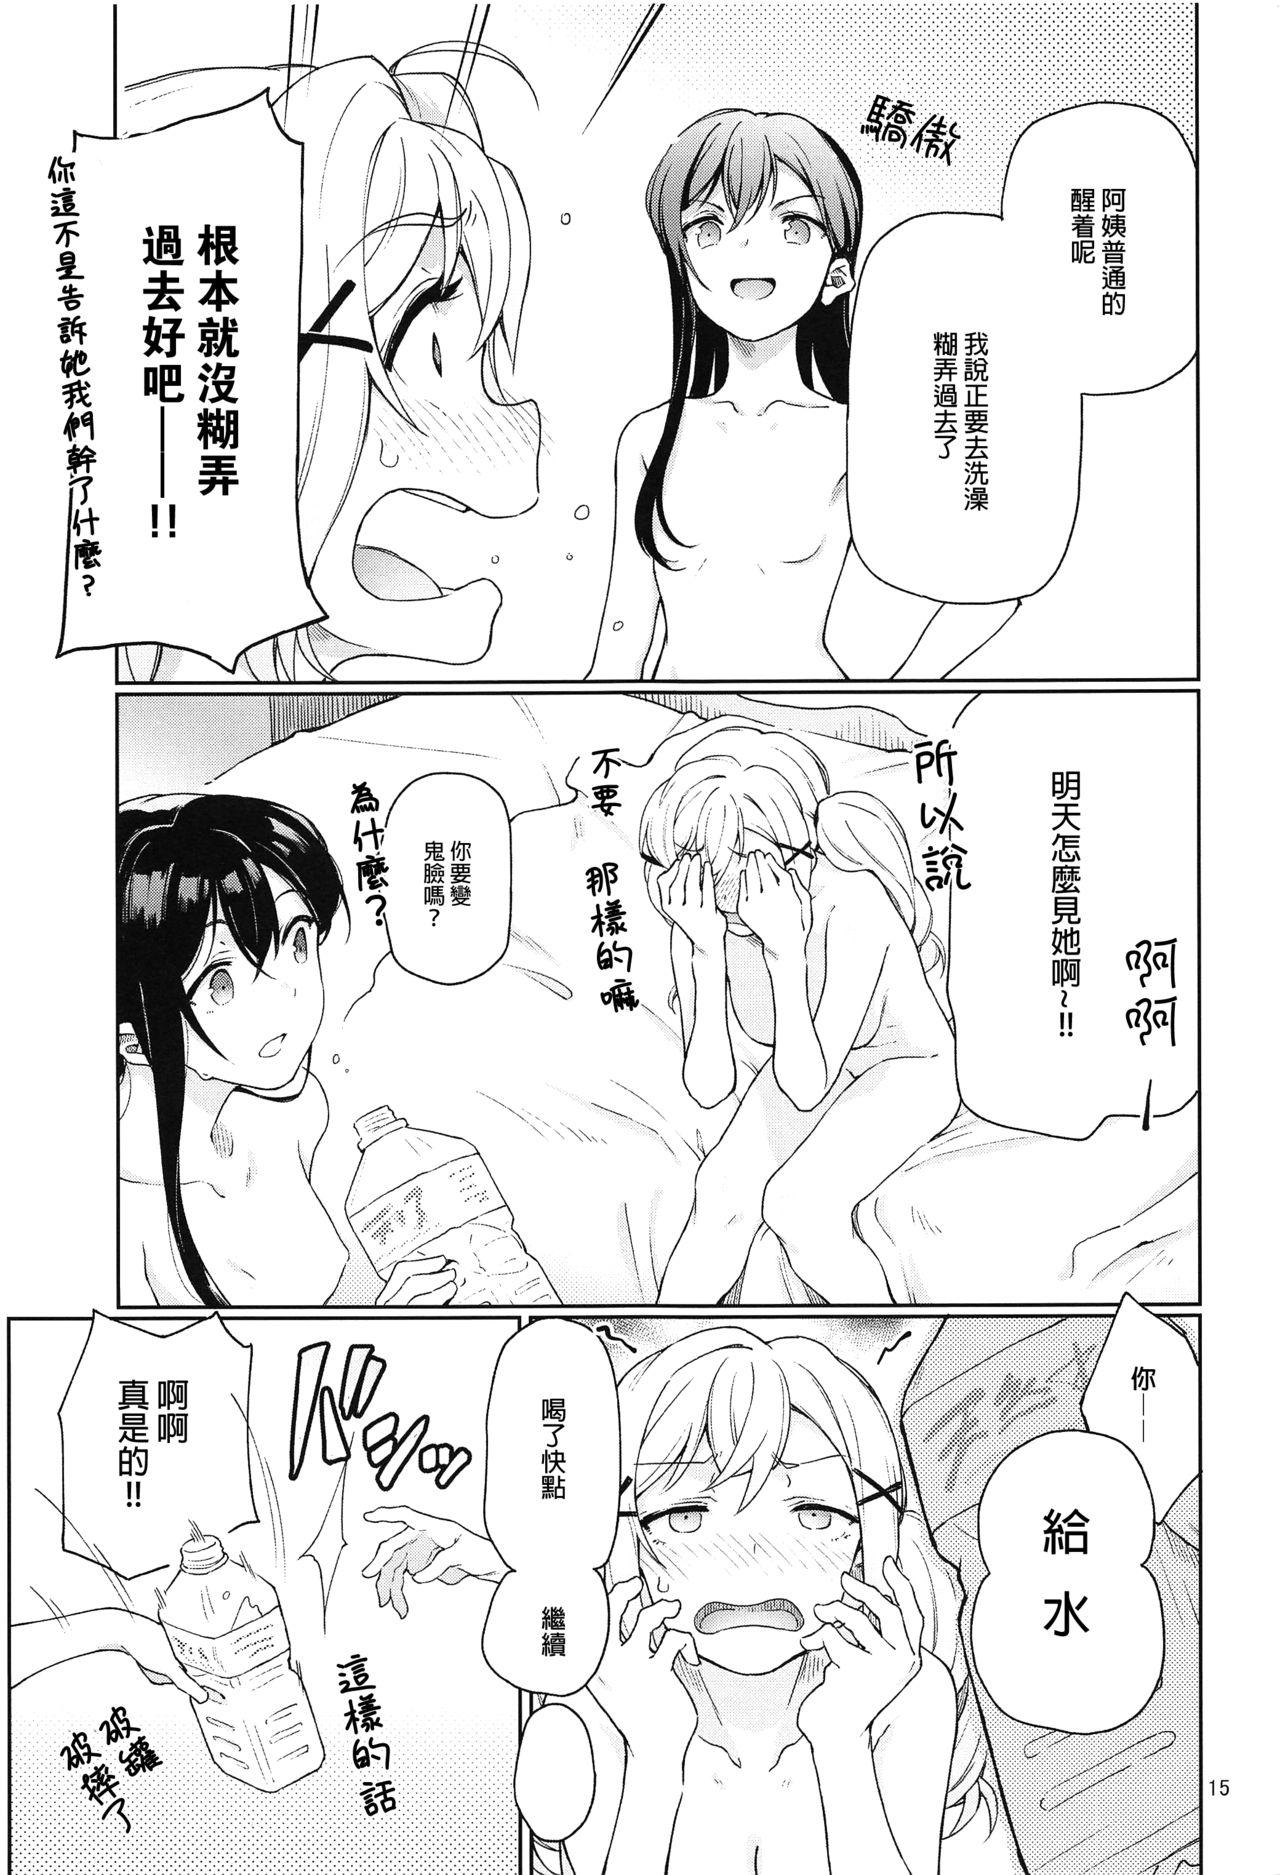 Solo Jealousy All Night - Bang dream Free Rough Porn - Page 17